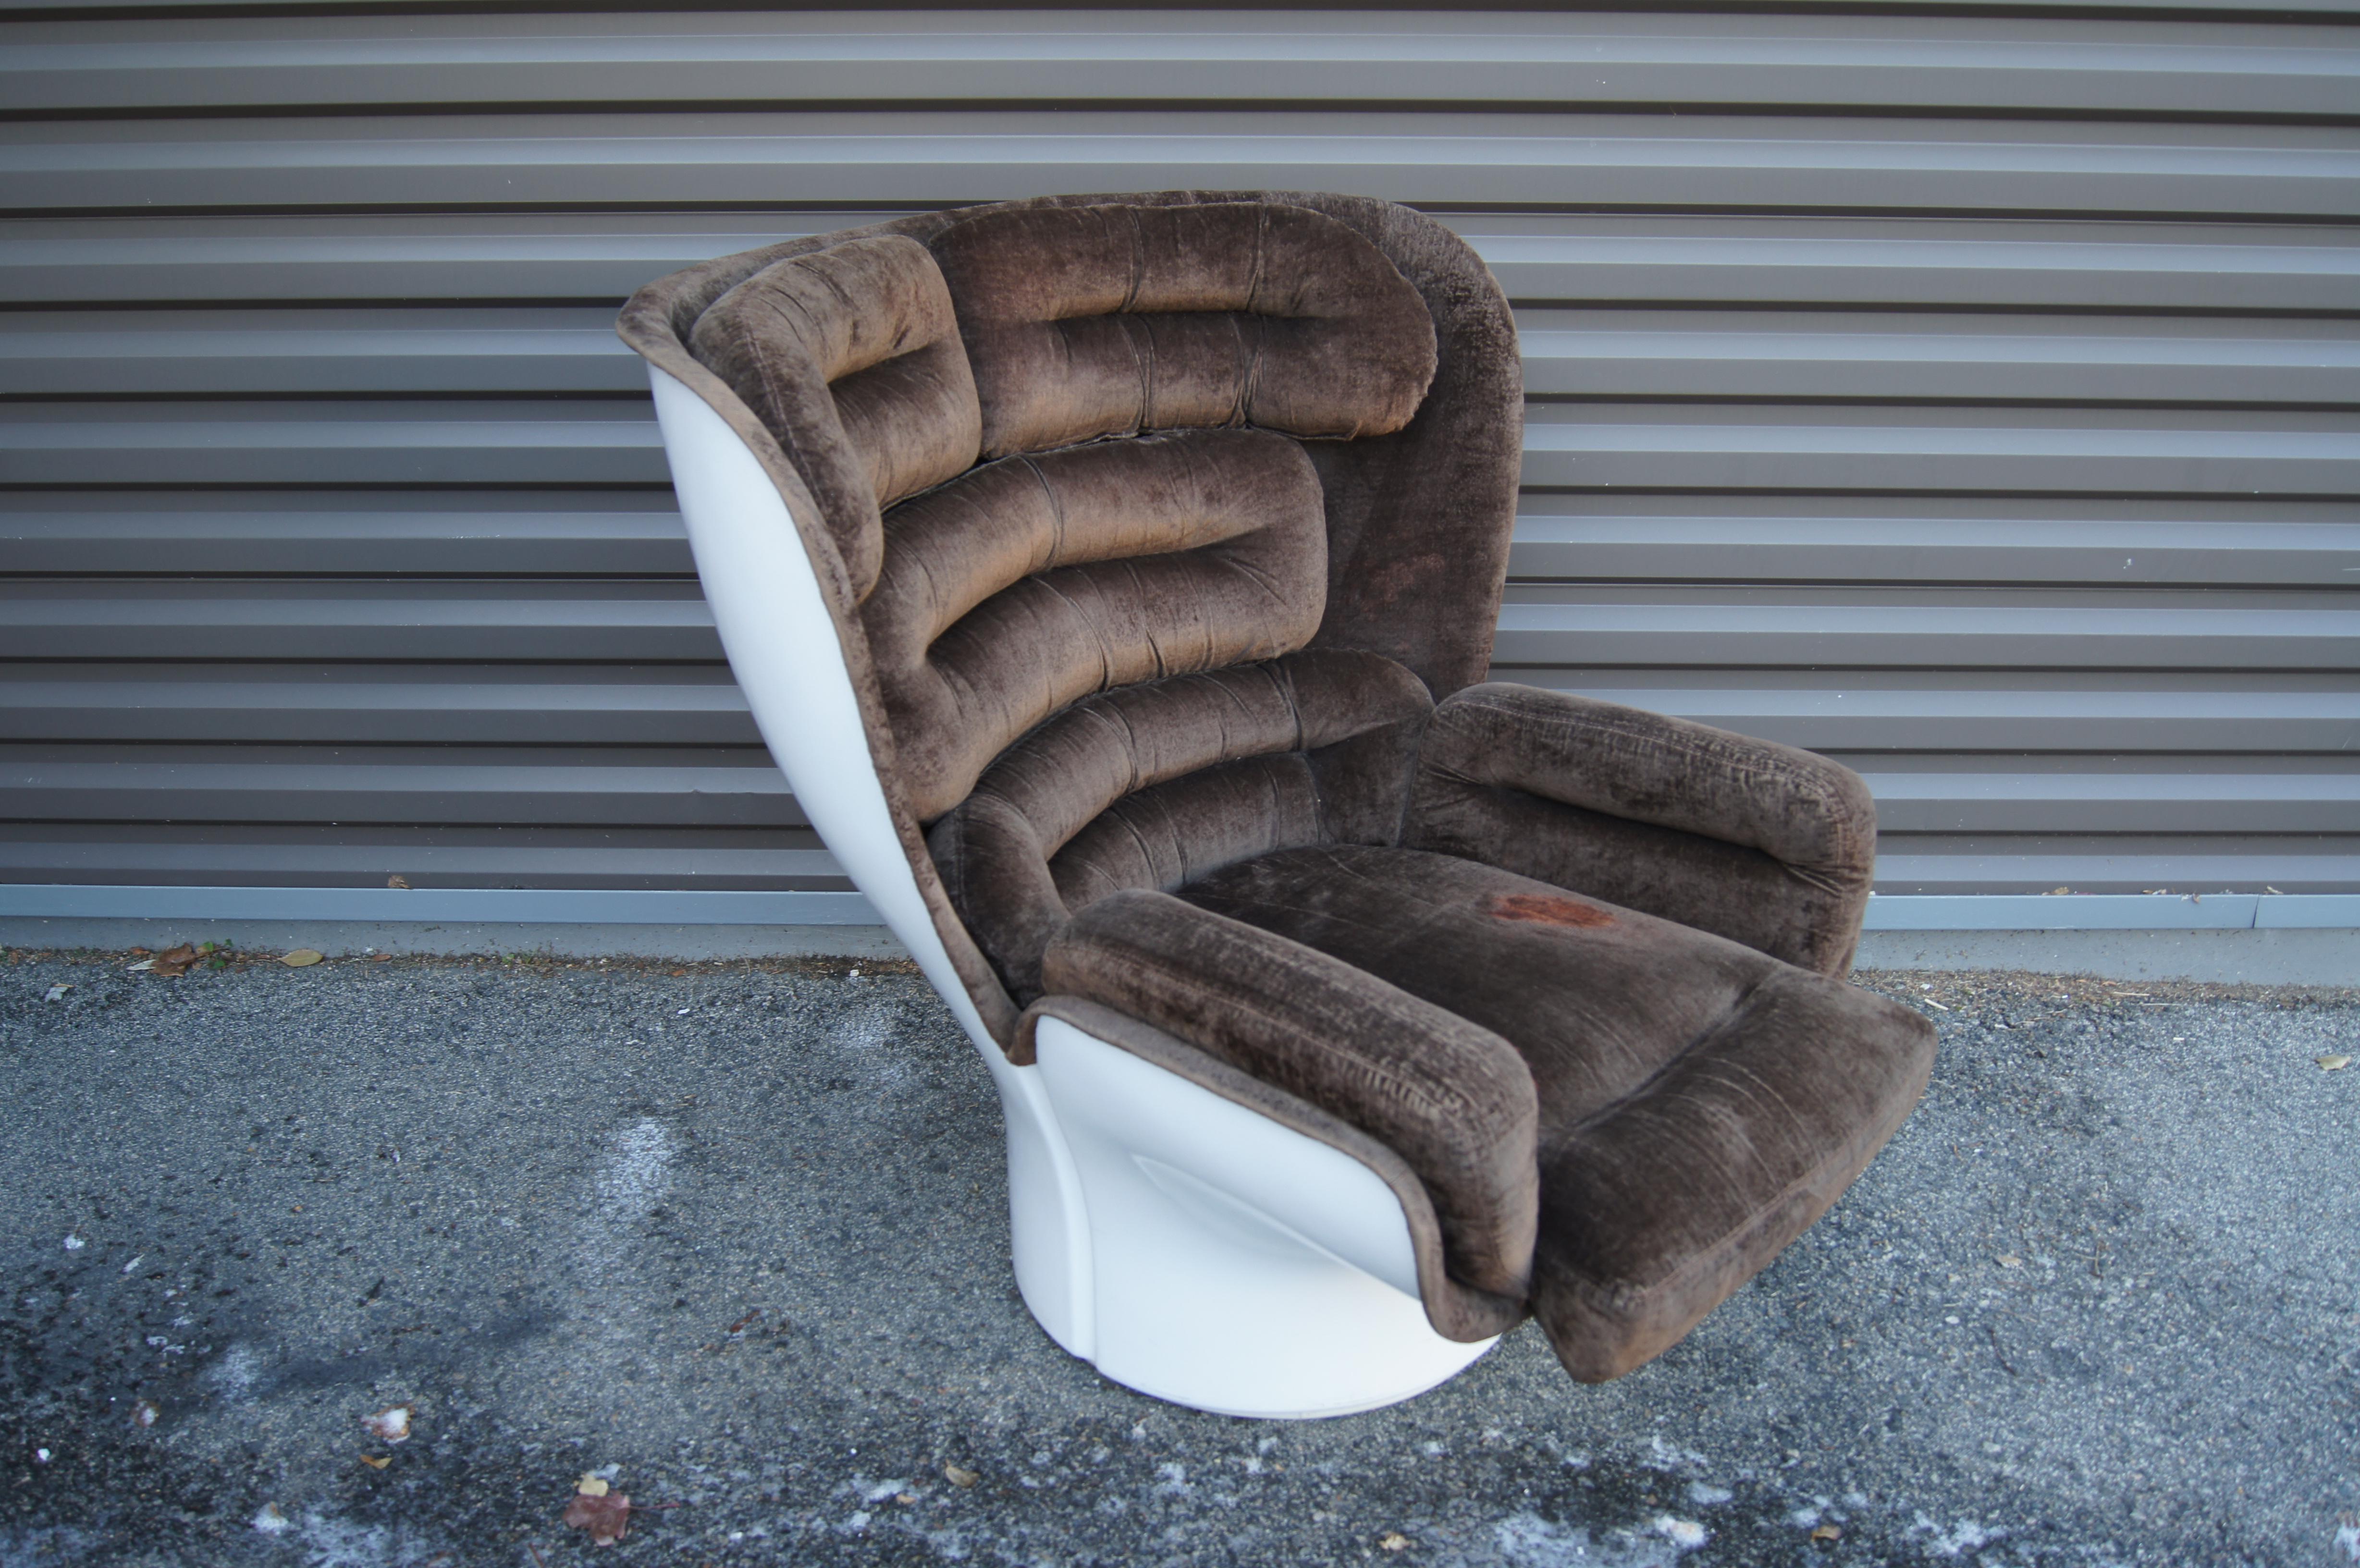 Designed by Joe Colombo in 1965 (and named for his wife), the iconic Elda Chair marries a powerful Space Age frame of fiberglass with deep channeled cushions (seven detachable in all) that envelope the sitter in a roomy, comfortable embrace. The